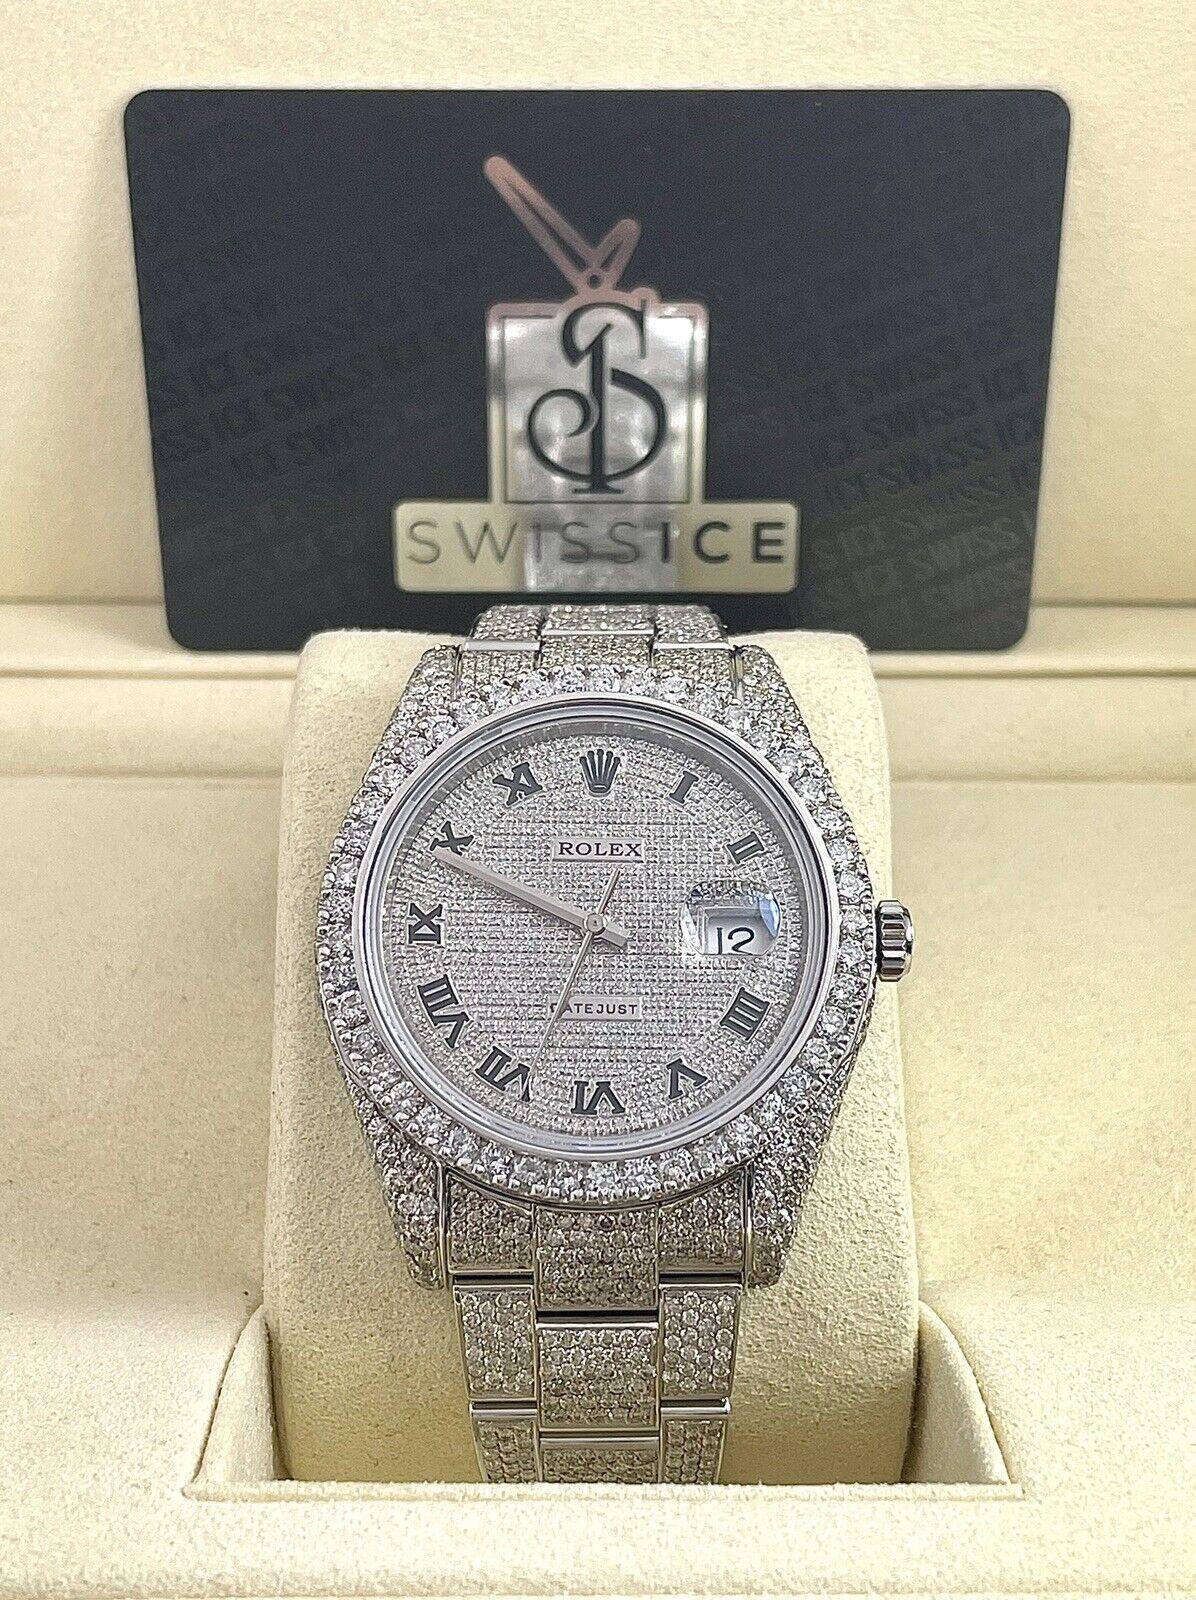 Rolex Men's Datejust II Oyster 41mm Iced Out 20ct Genuine Diamonds Ref:116300 In Excellent Condition For Sale In Pleasanton, CA